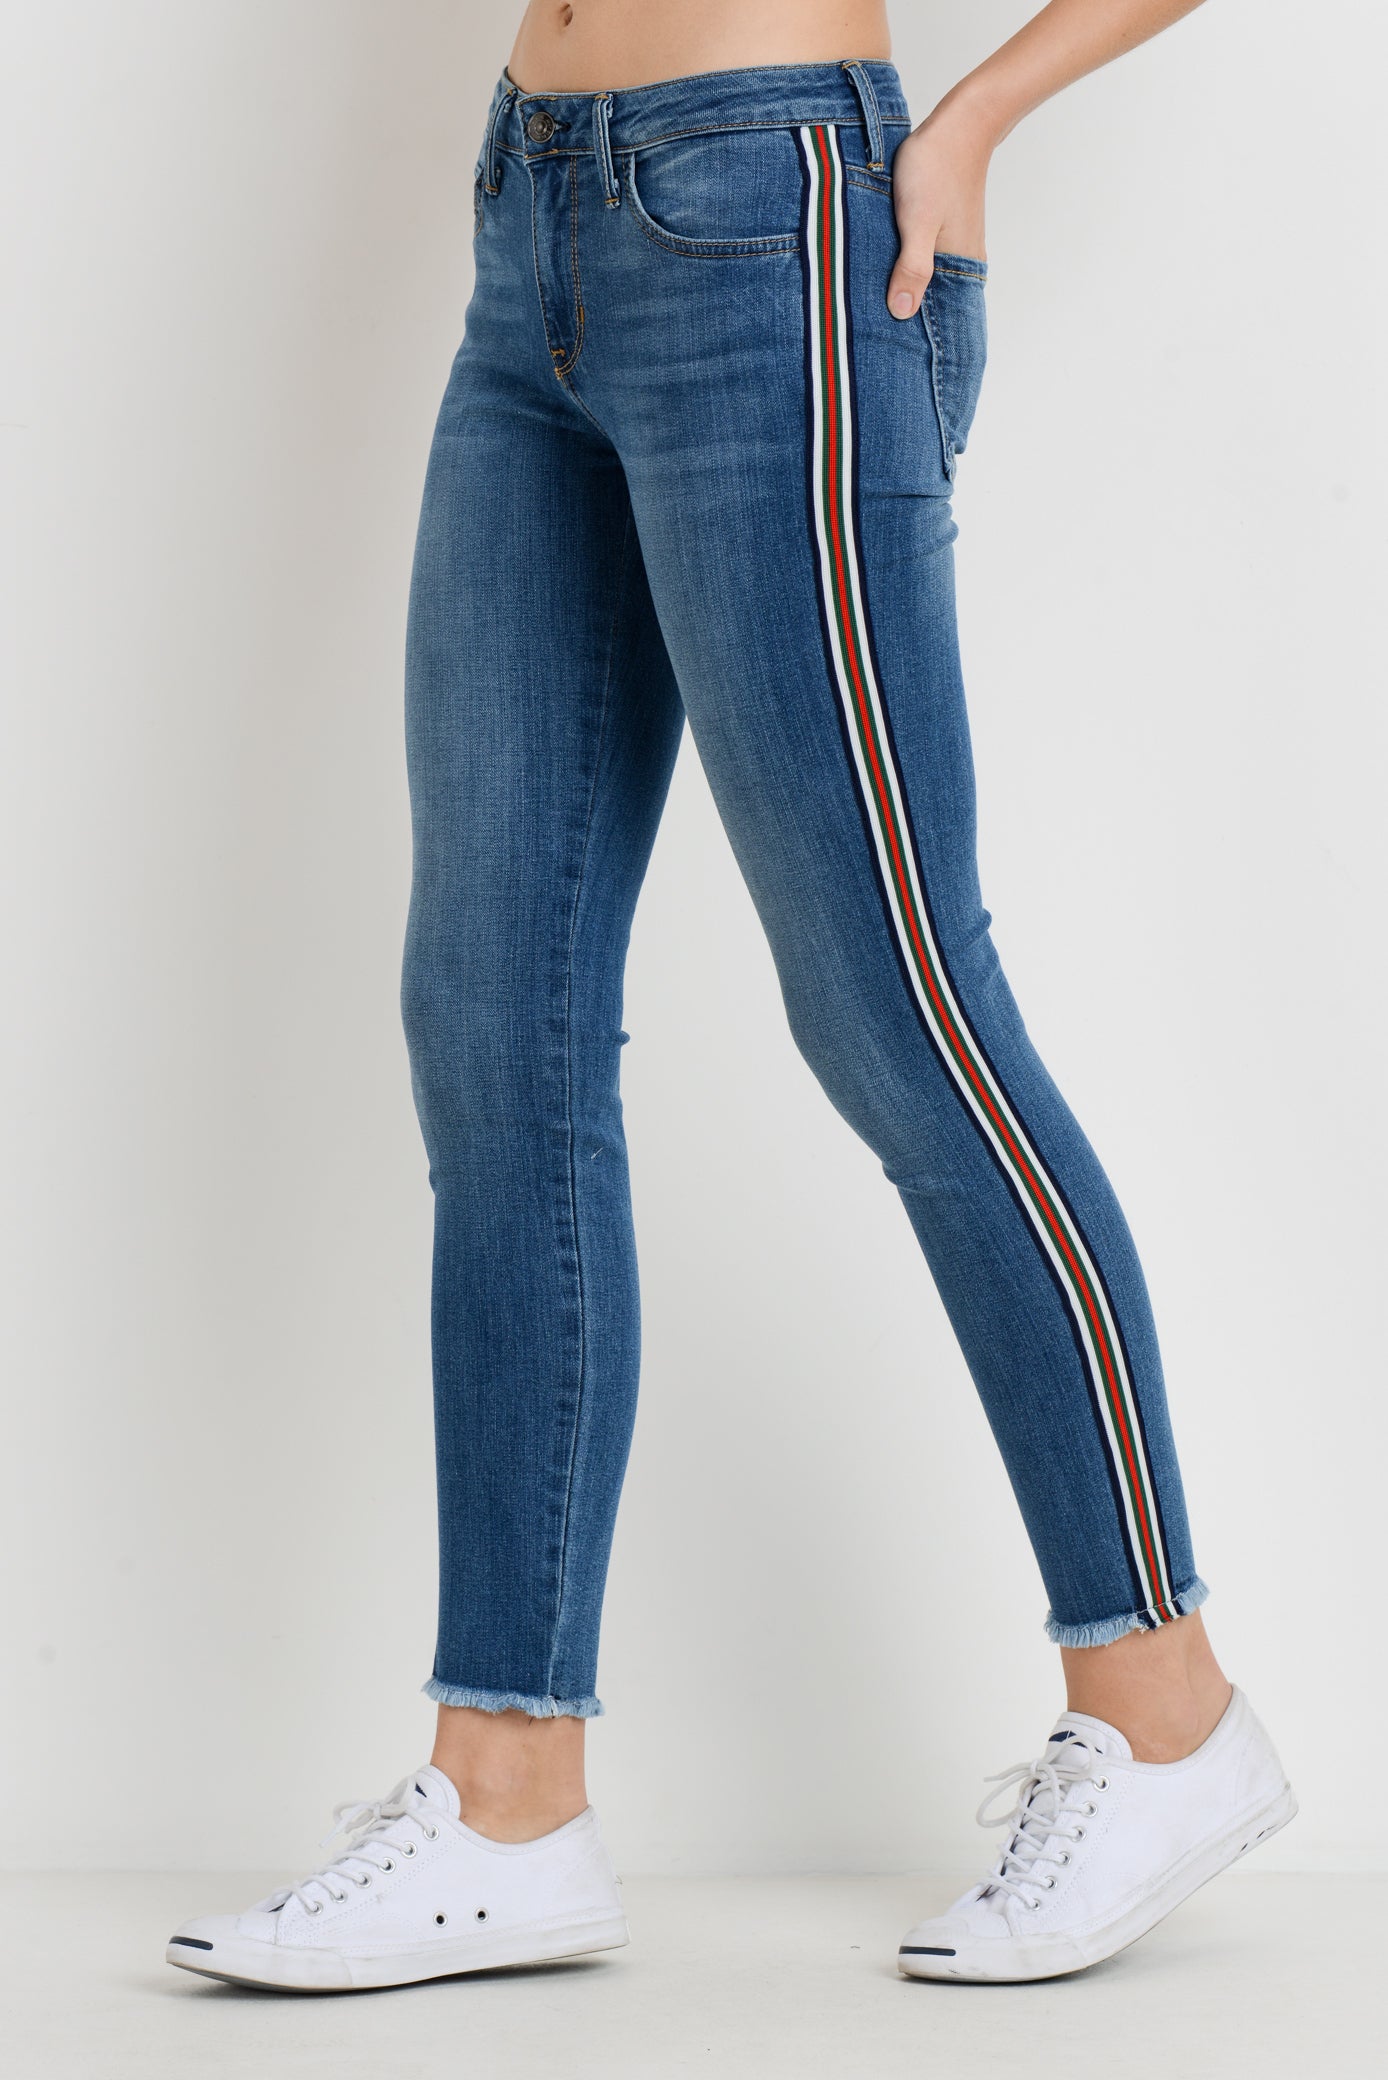 Ananya Girls Wear Side Strip / Patti Jeans for Women Set Of 15 | Udaan -  B2B Buying for Retailers